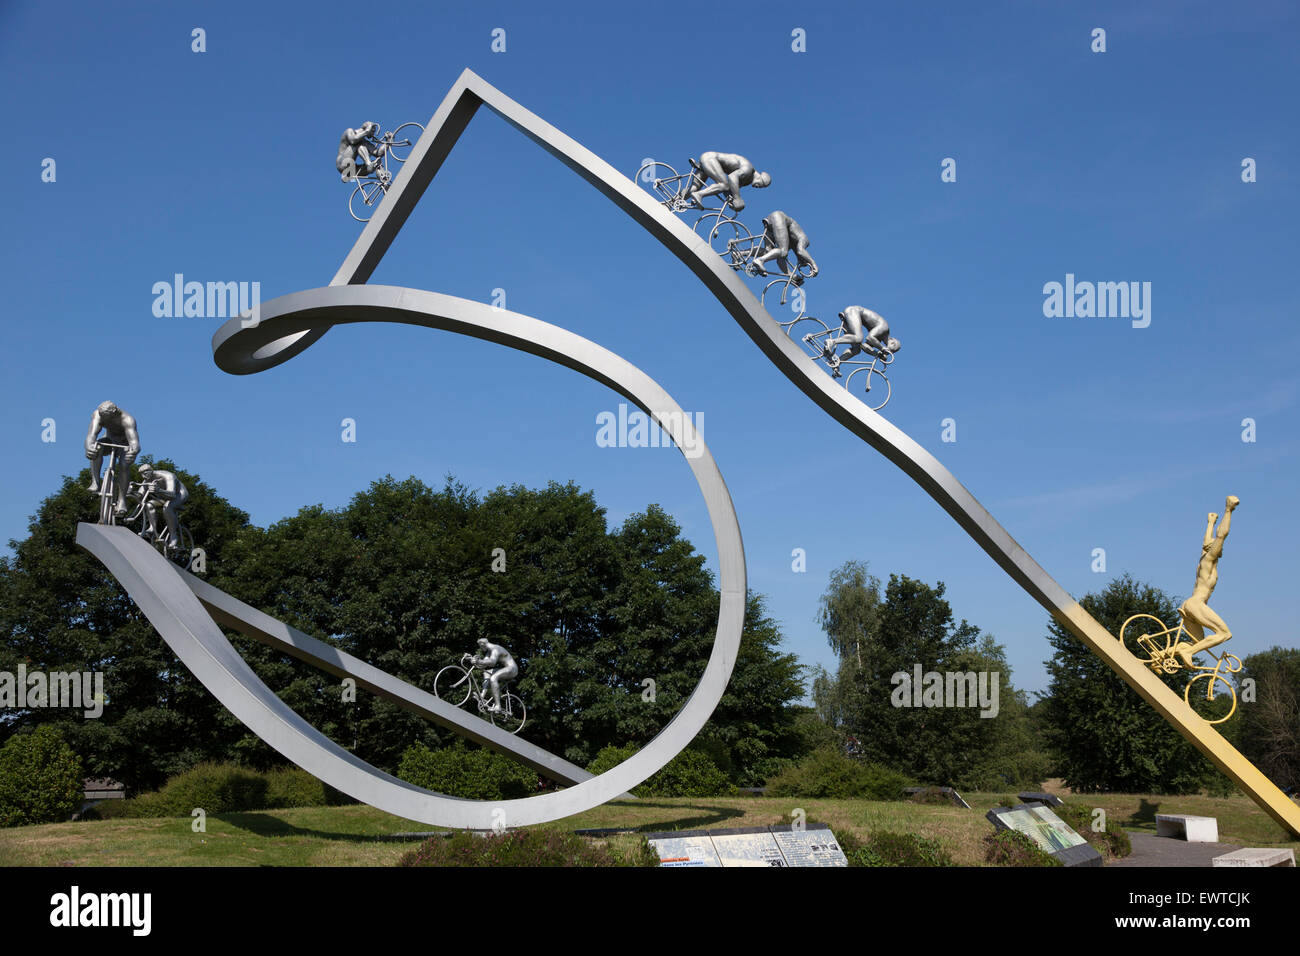 A monument dedicated to the Tour de France, between Pau and Tarbes on the "of the Pyrenees" rest area of the French A64. Stock Photo